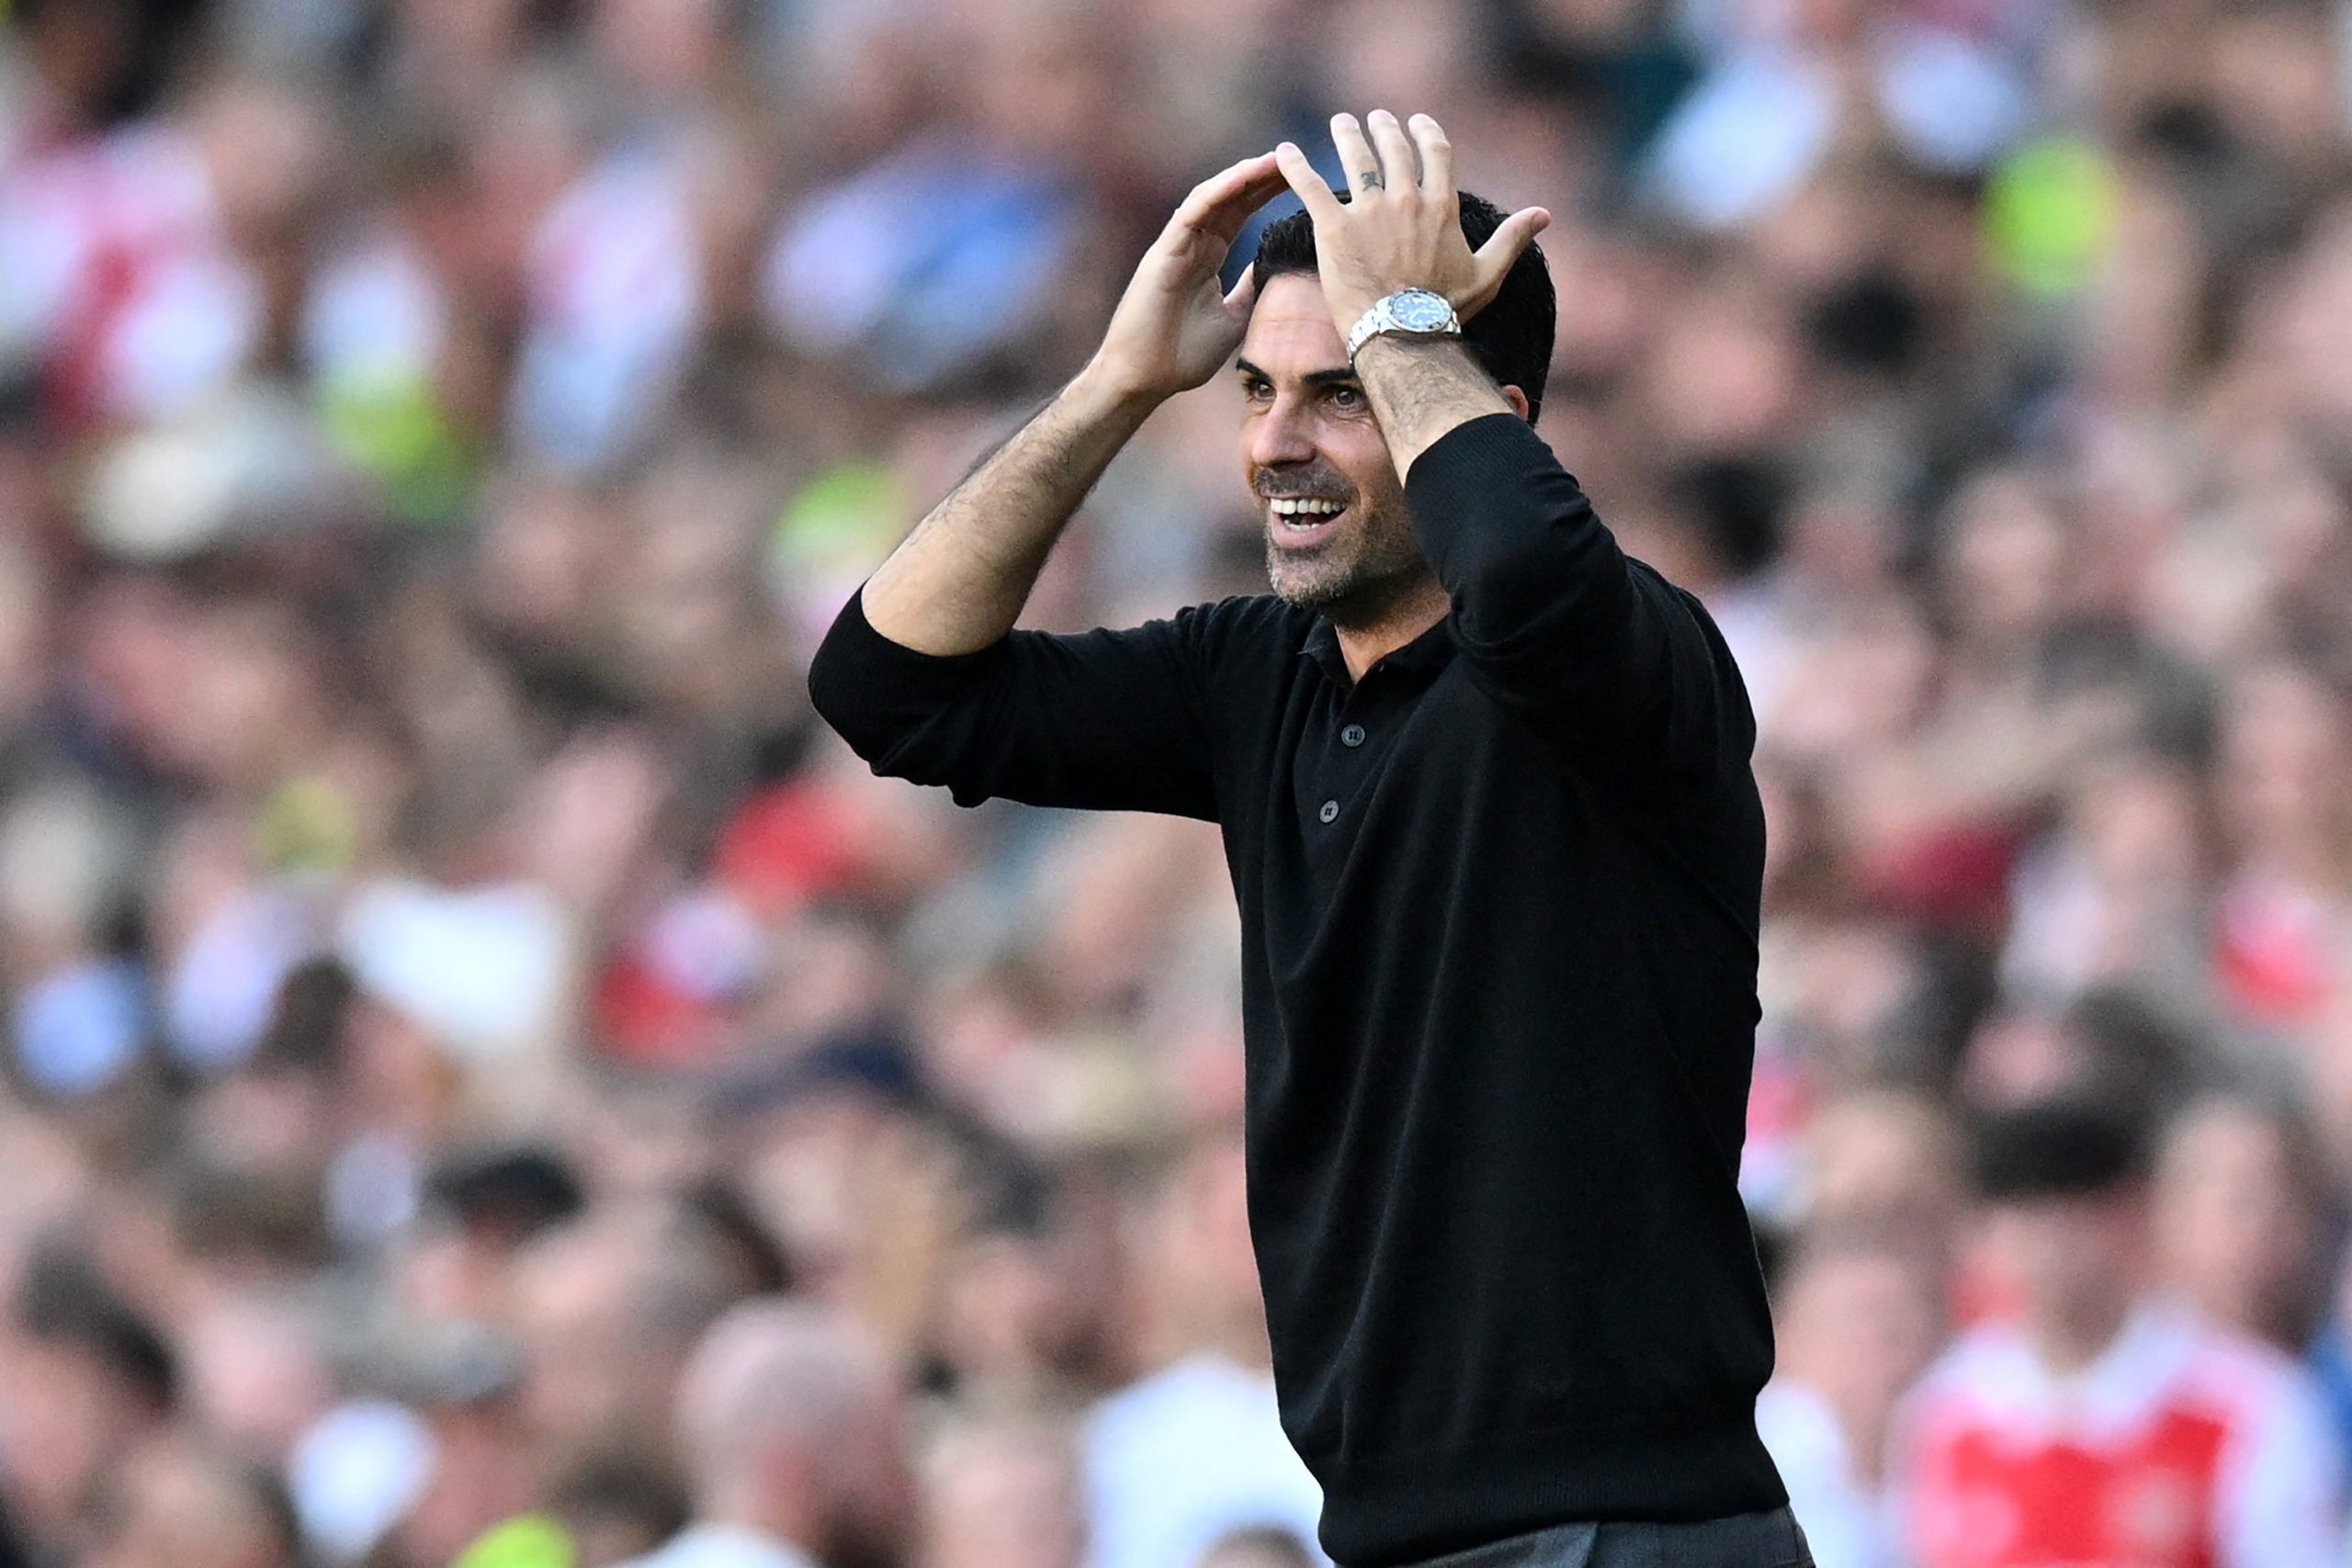 Arsenal's Spanish manager Mikel Arteta gestures on the touchline as a penalty decision is reviewed by the VAR (Video Assistant Referee) during the English Premier League football match between Arsenal and Manchester United at the Emirates Stadium in London on September 3, 2023. (Photo by Glyn KIRK / AFP) / RESTRICTED TO EDITORIAL USE. No use with unauthorized audio, video, data, fixture lists, club/league logos or 'live' services. Online in-match use limited to 120 images. An additional 40 images may be used in extra time. No video emulation. Social media in-match use limited to 120 images. An additional 40 images may be used in extra time. No use in betting publications, games or single club/league/player publications. /  (Photo by GLYN KIRK/AFP via Getty Images)